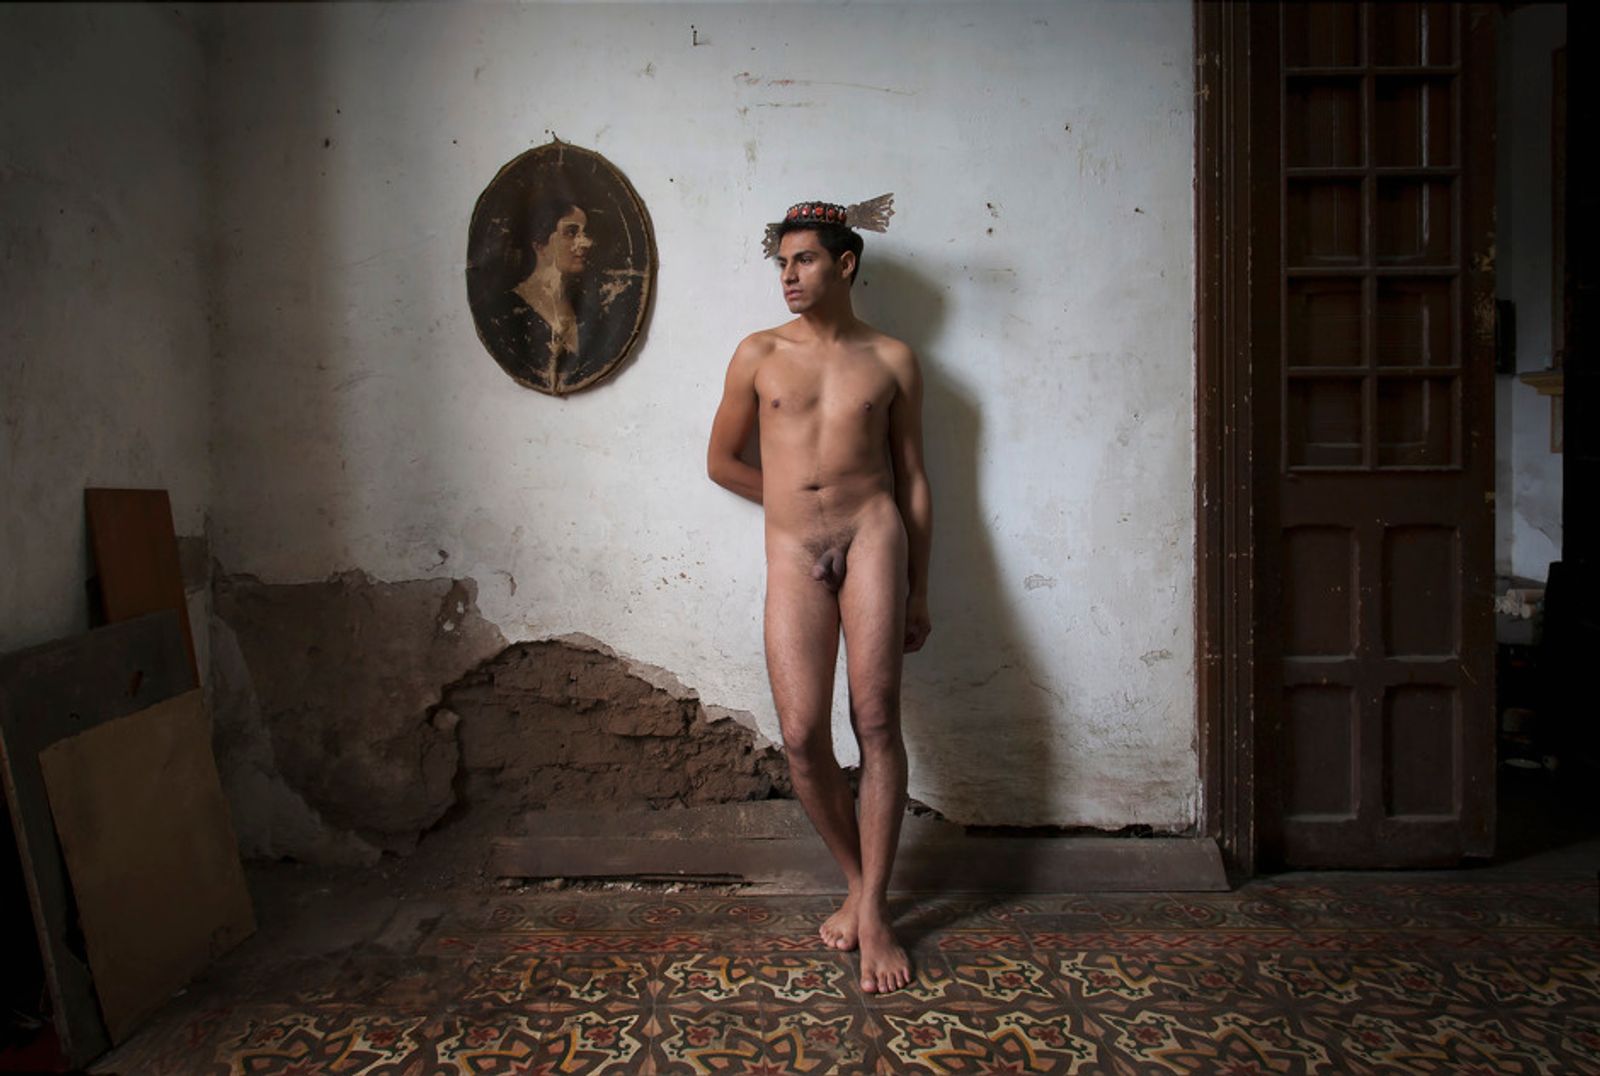 © Juan Jose Barboza-Gubo and Andrew Mroczek - Image from the Los Chicos (Lima, Peru) photography project